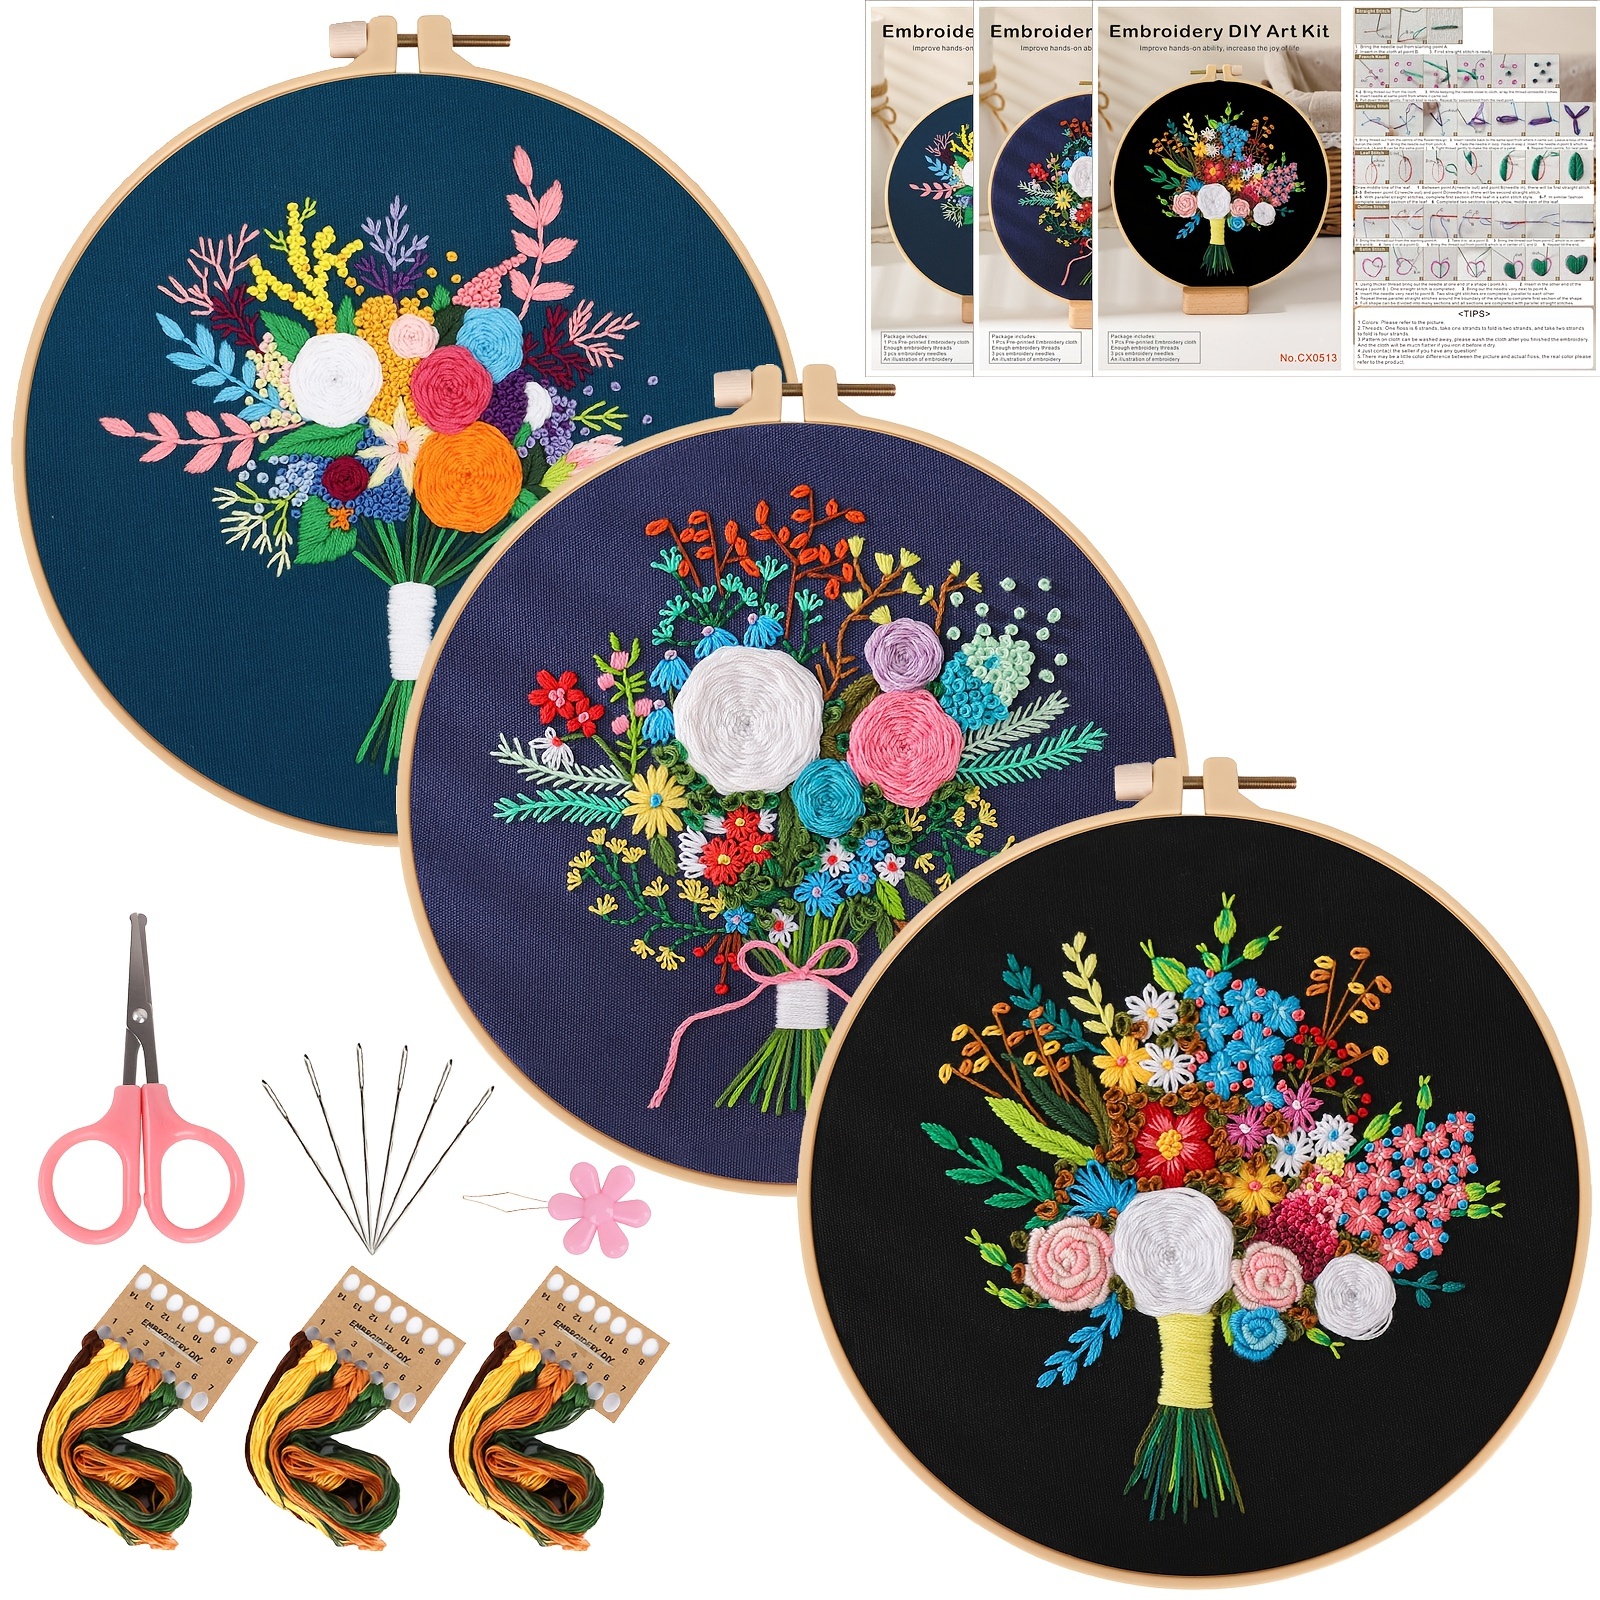 Customized Christmas Hoop Art Cotton White Floral Embroidery For Him/Her  Gifts